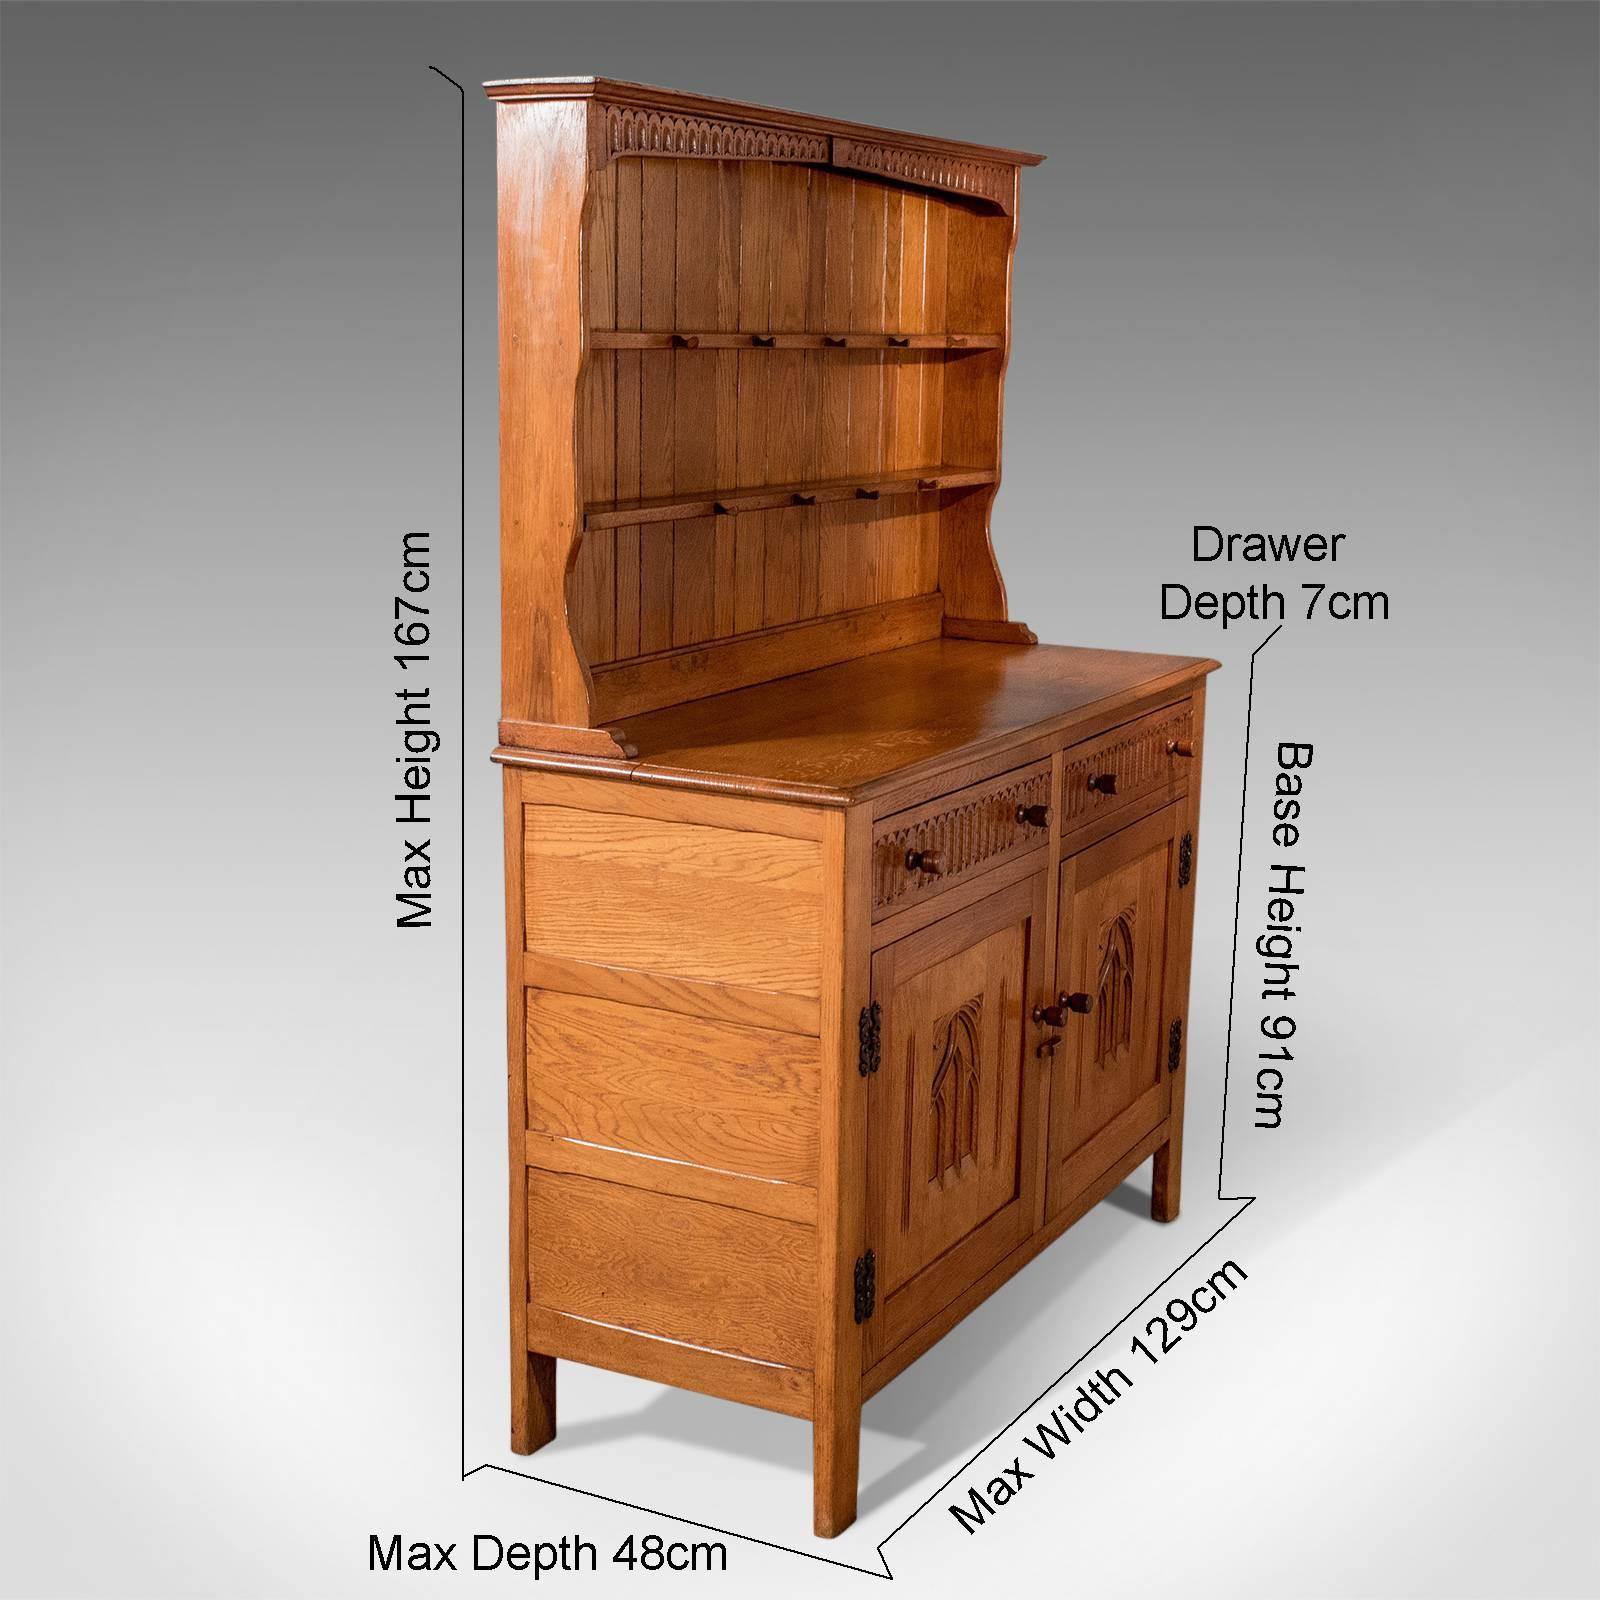 A most pleasing kitchen dresser presented in very good antique condition
With Classic Tudor overtones to this well crafted item of functional display furniture
Skilfully crafted by the noted English maker Webber - creators of fine oak furniture